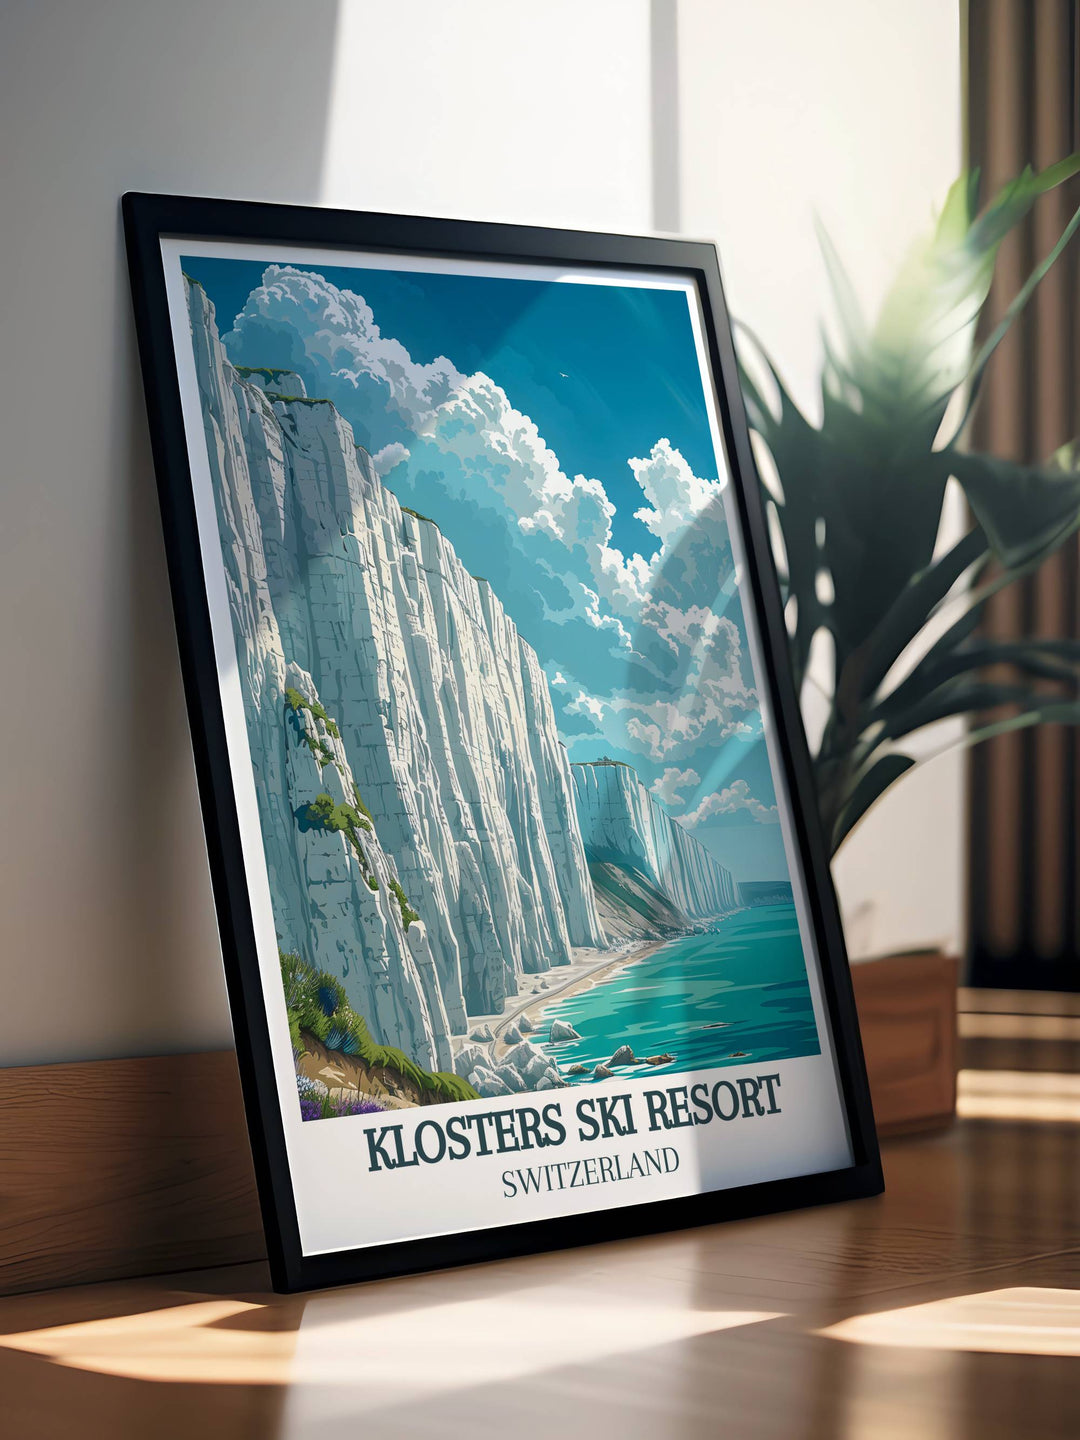 Bring the elegance of the White Cliffs of Dover into your home with our exquisite vintage print. This White Cliffs of Dover artwork is perfect for those who appreciate serene landscapes and classic English scenery. Ideal for enhancing any living space or office